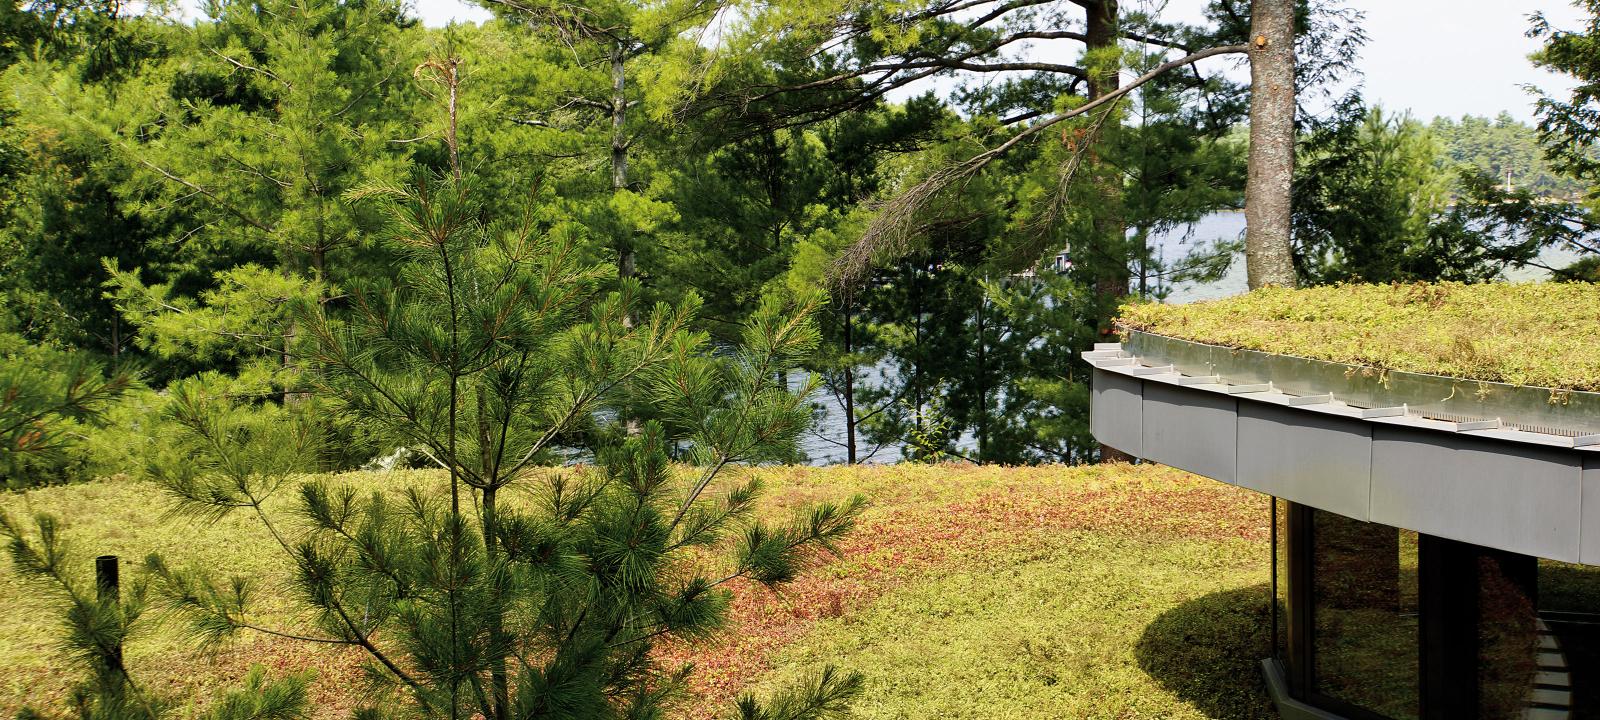 Extensive green roofs in front of pine trees